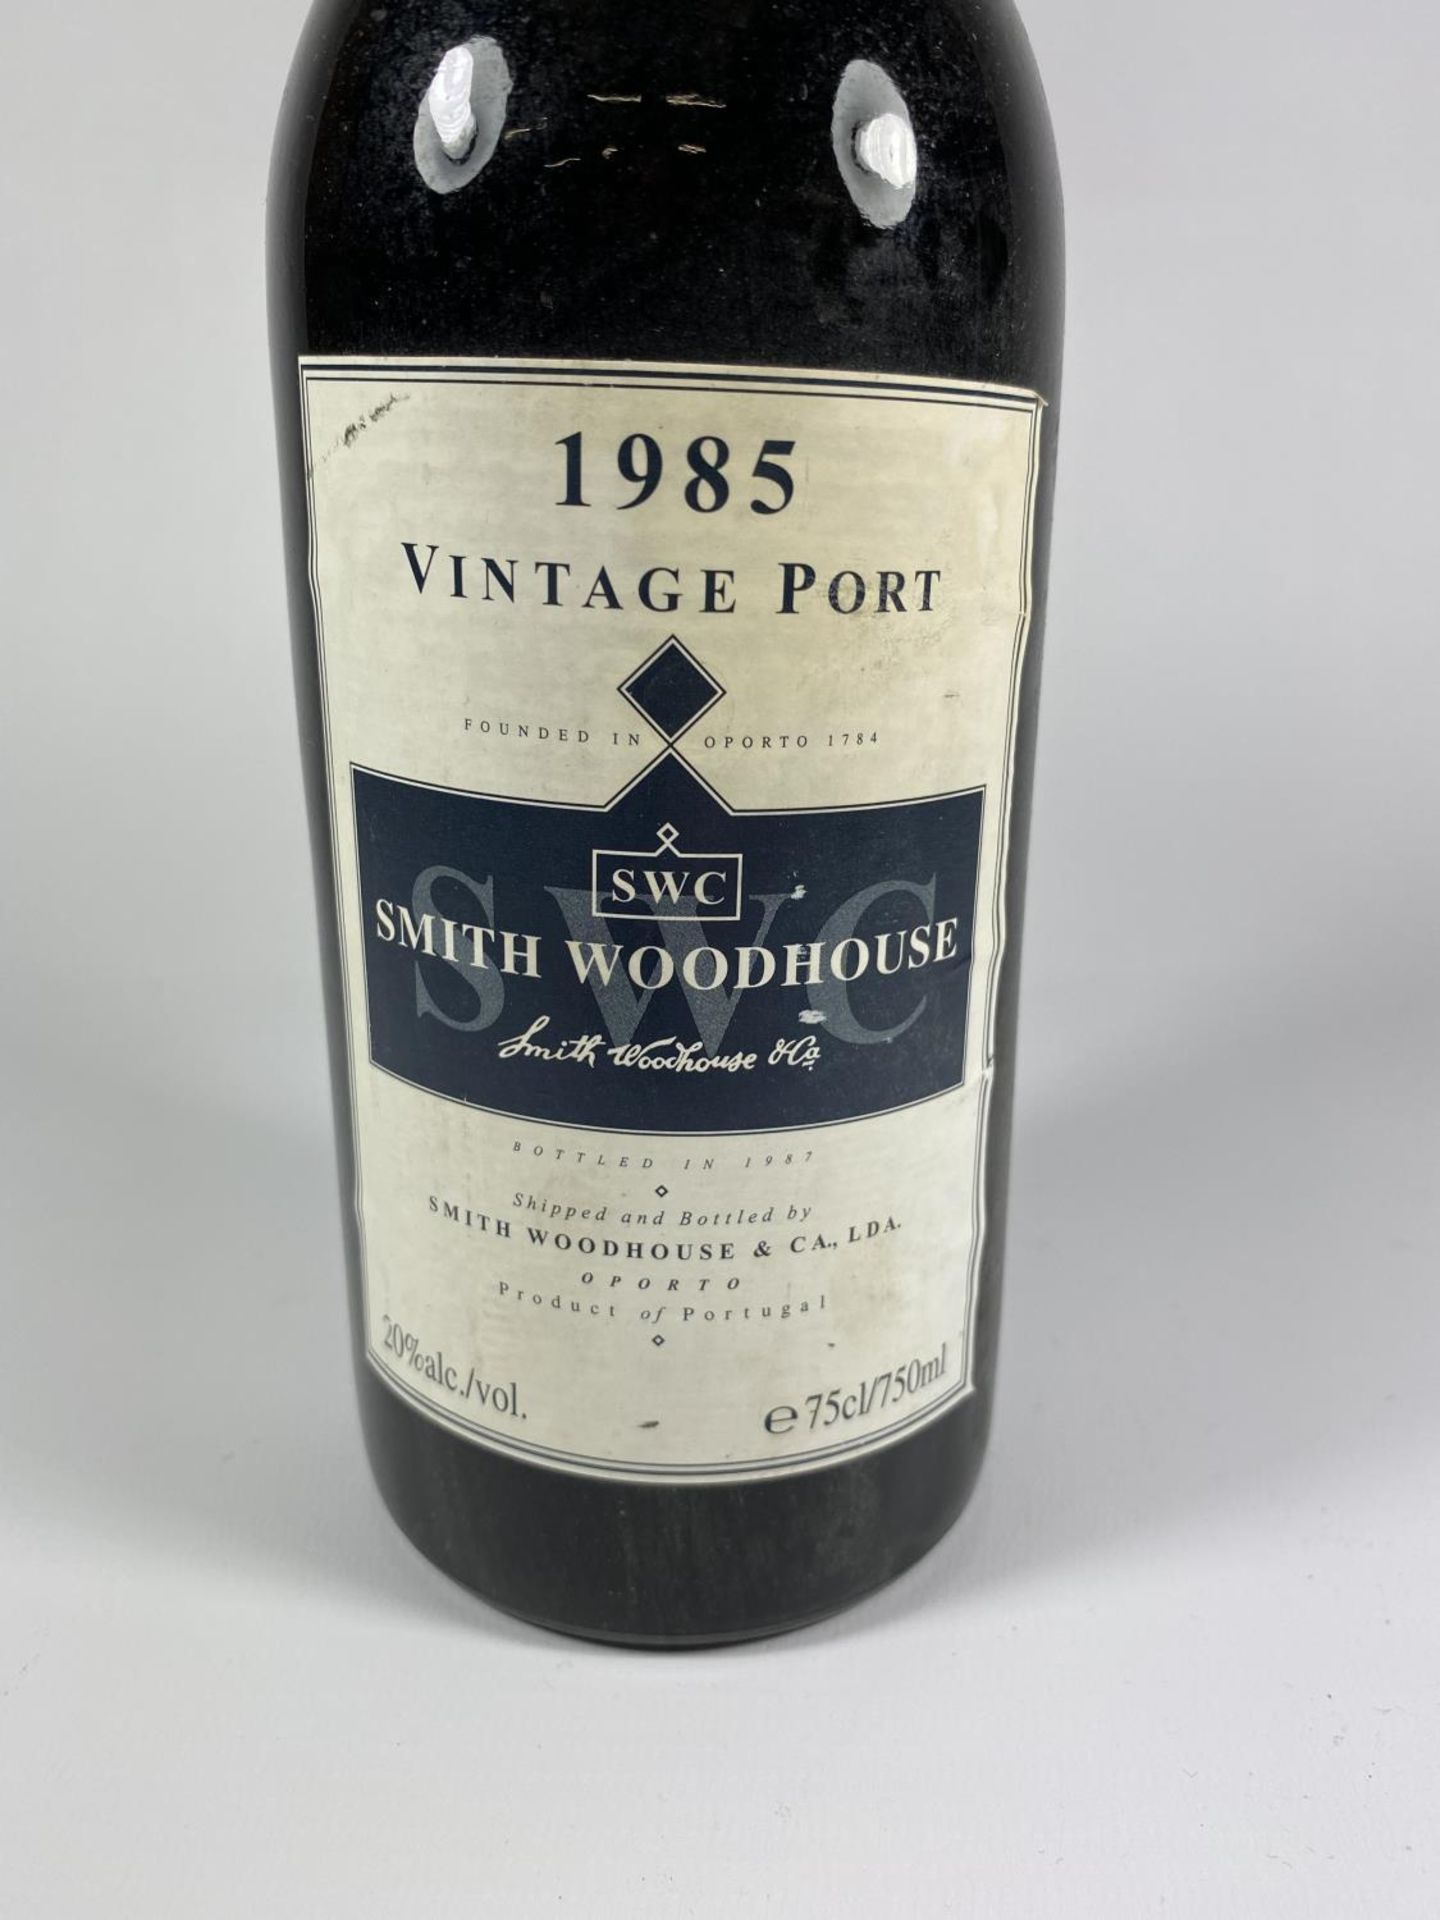 1 X 75CL BOTTLE - SMITH WOODHOUSE SWC 1985 VINTAGE PORT - Image 2 of 4